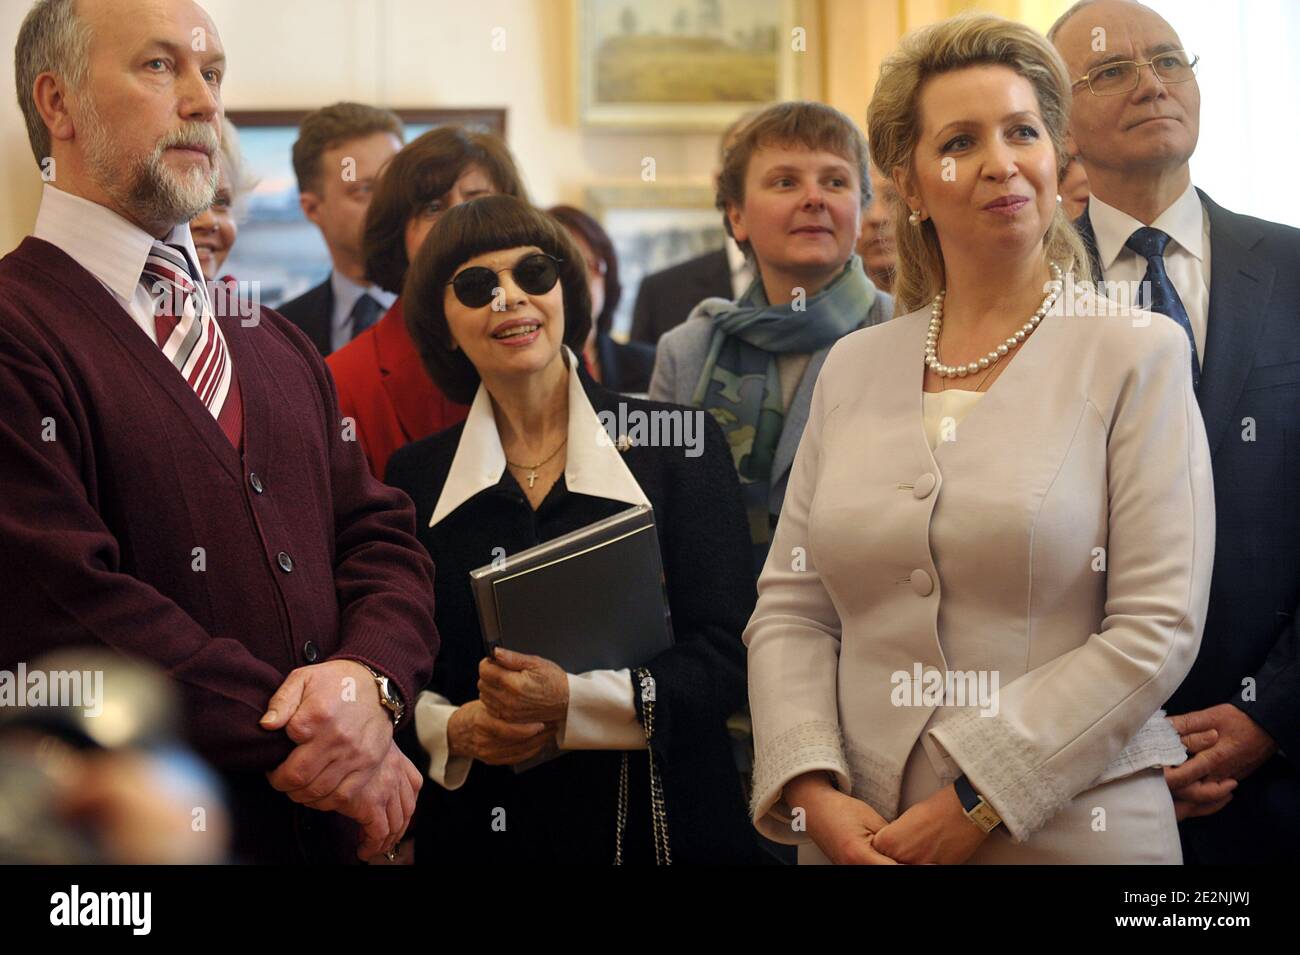 Russia's First Lady Svetlana Medvedeva flanked by French singer Mireille Mathieu visits the Exhibition 'Une Fenetre Sur La Russie' at the Russian Culture and Science Center in Paris, France on March 2, 2010. Photo by Giancarlo Gorassini/ABACAPRESS.COM Stock Photo